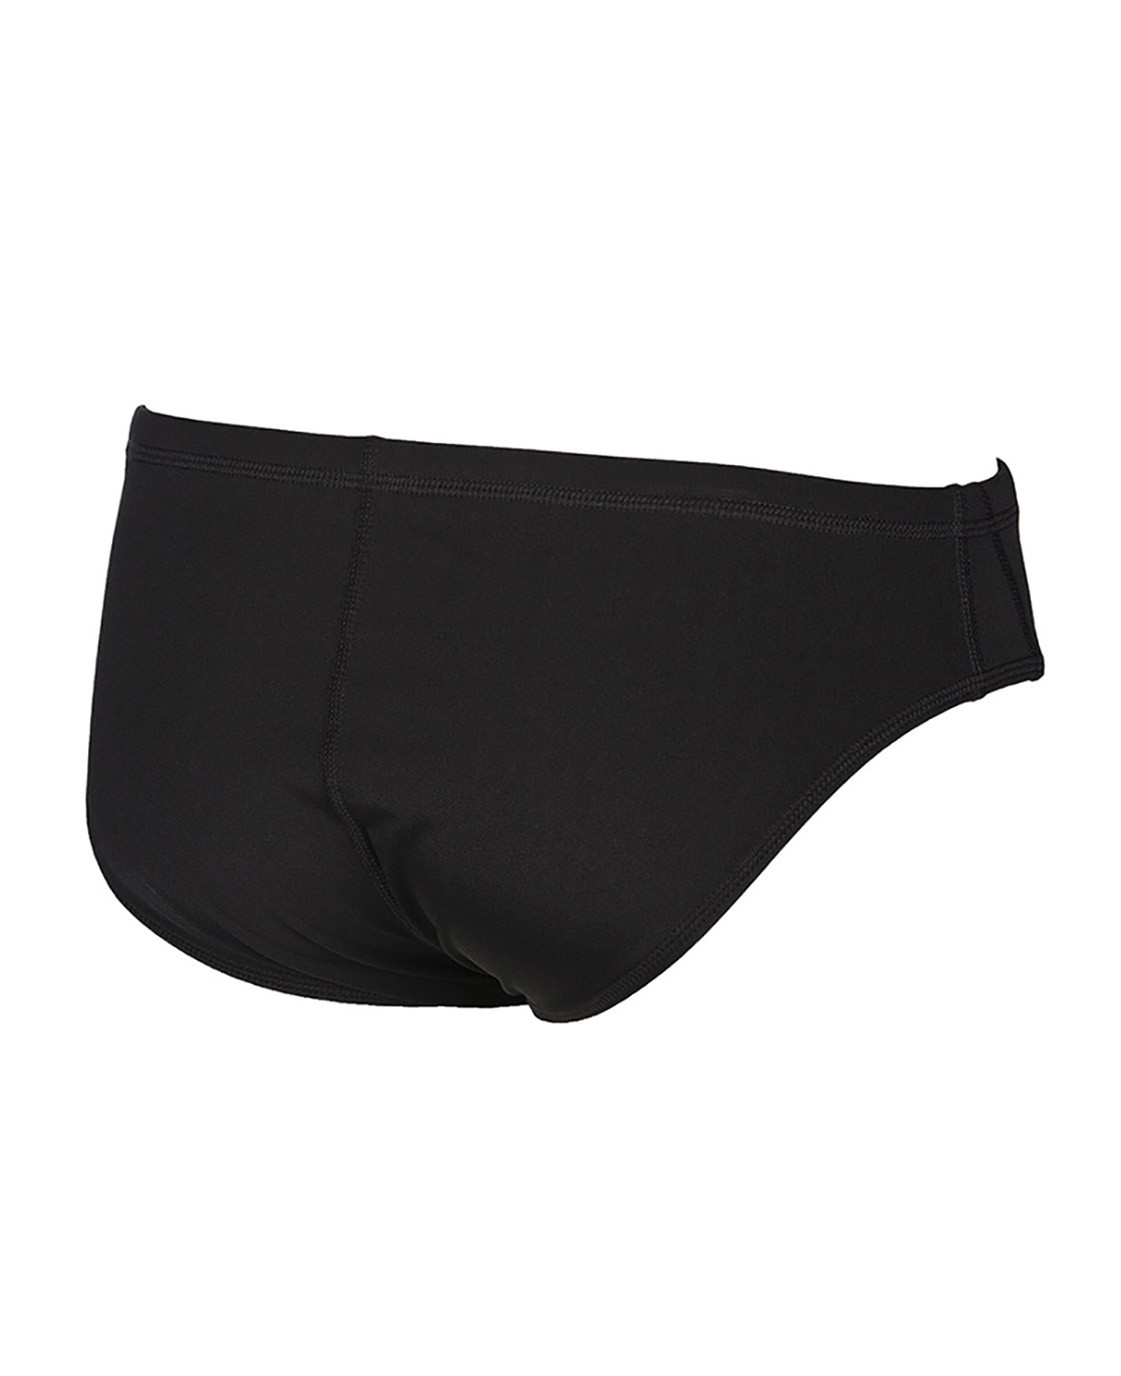 Плавки Arena M SOLID BRIEF 2A254-055